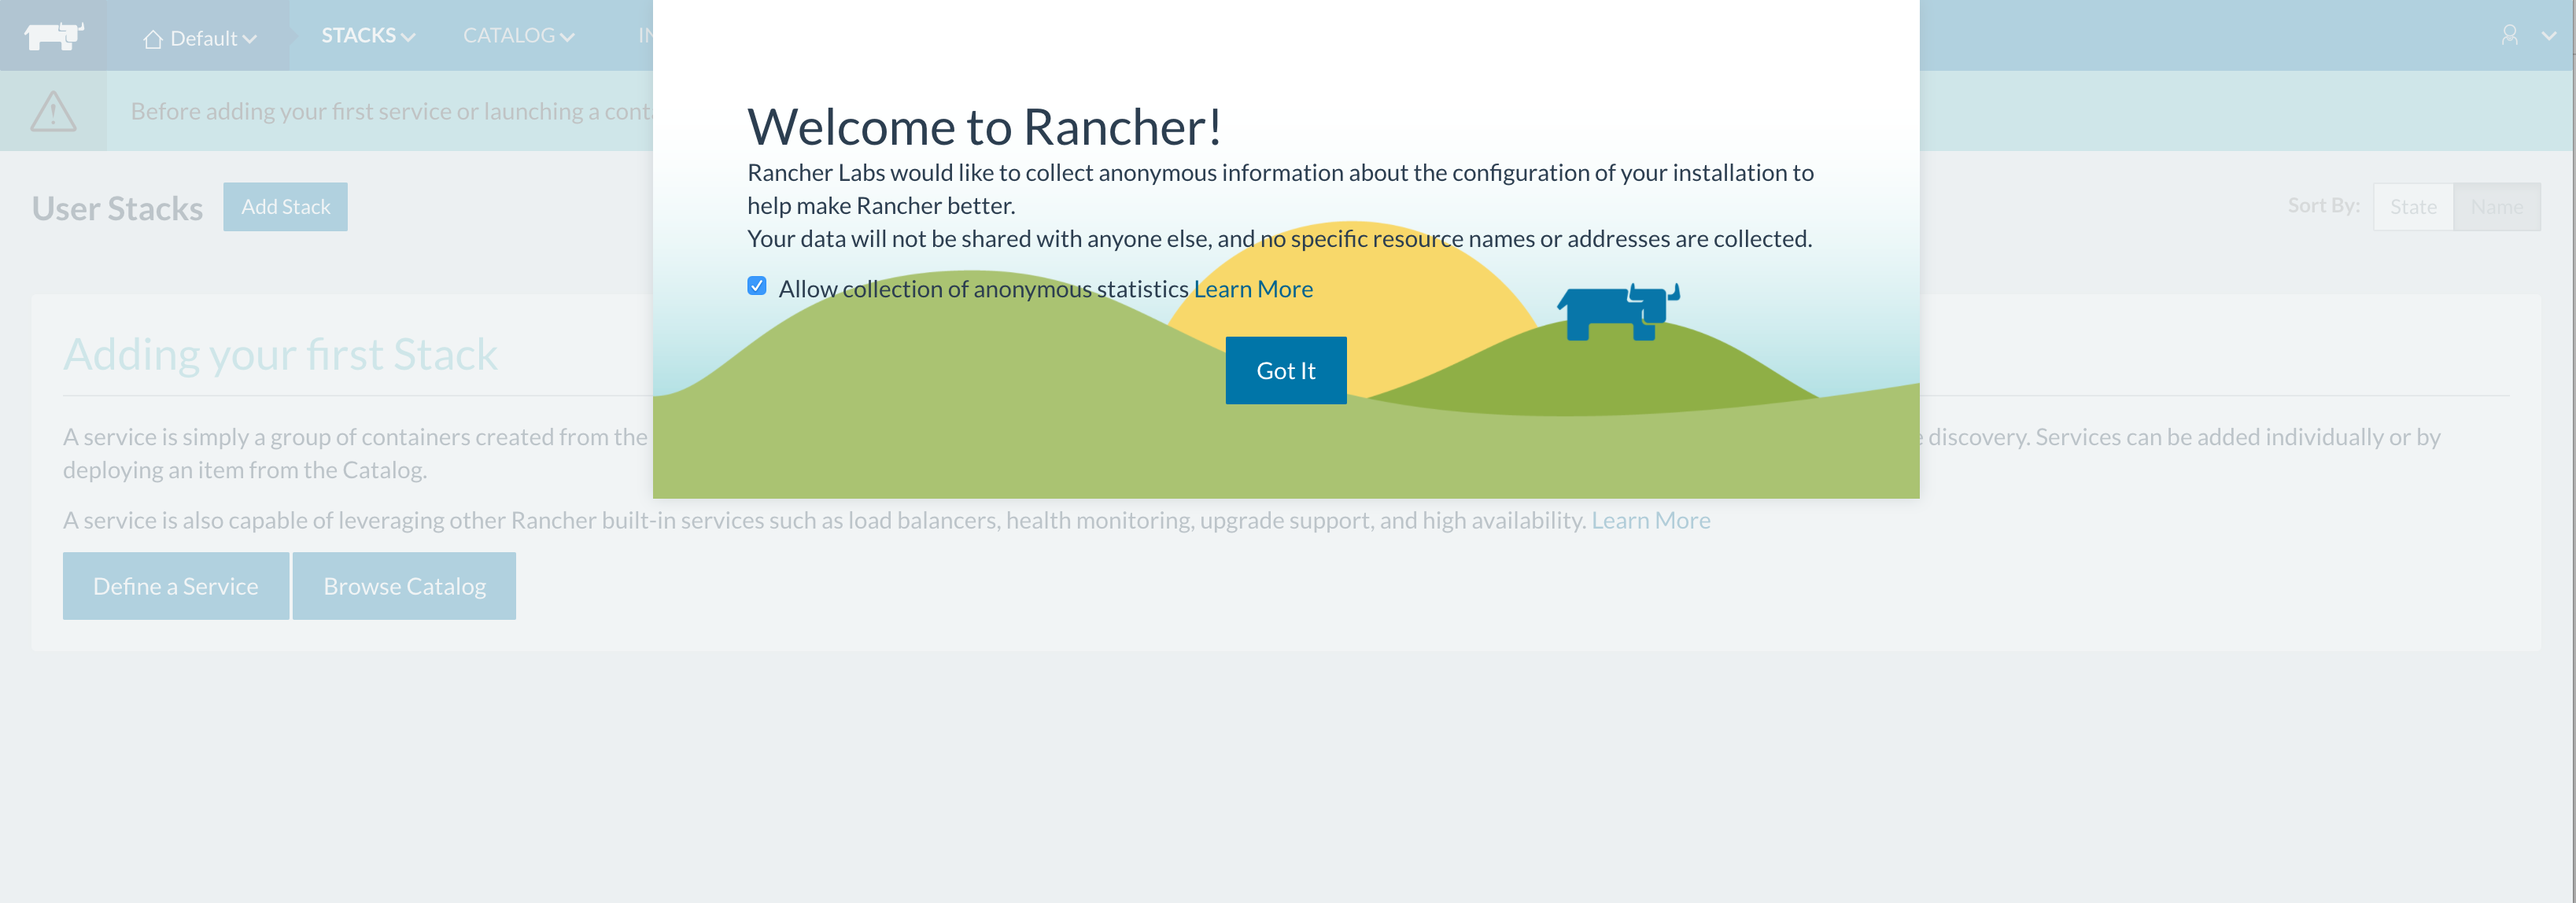 Rancher UI
welcome